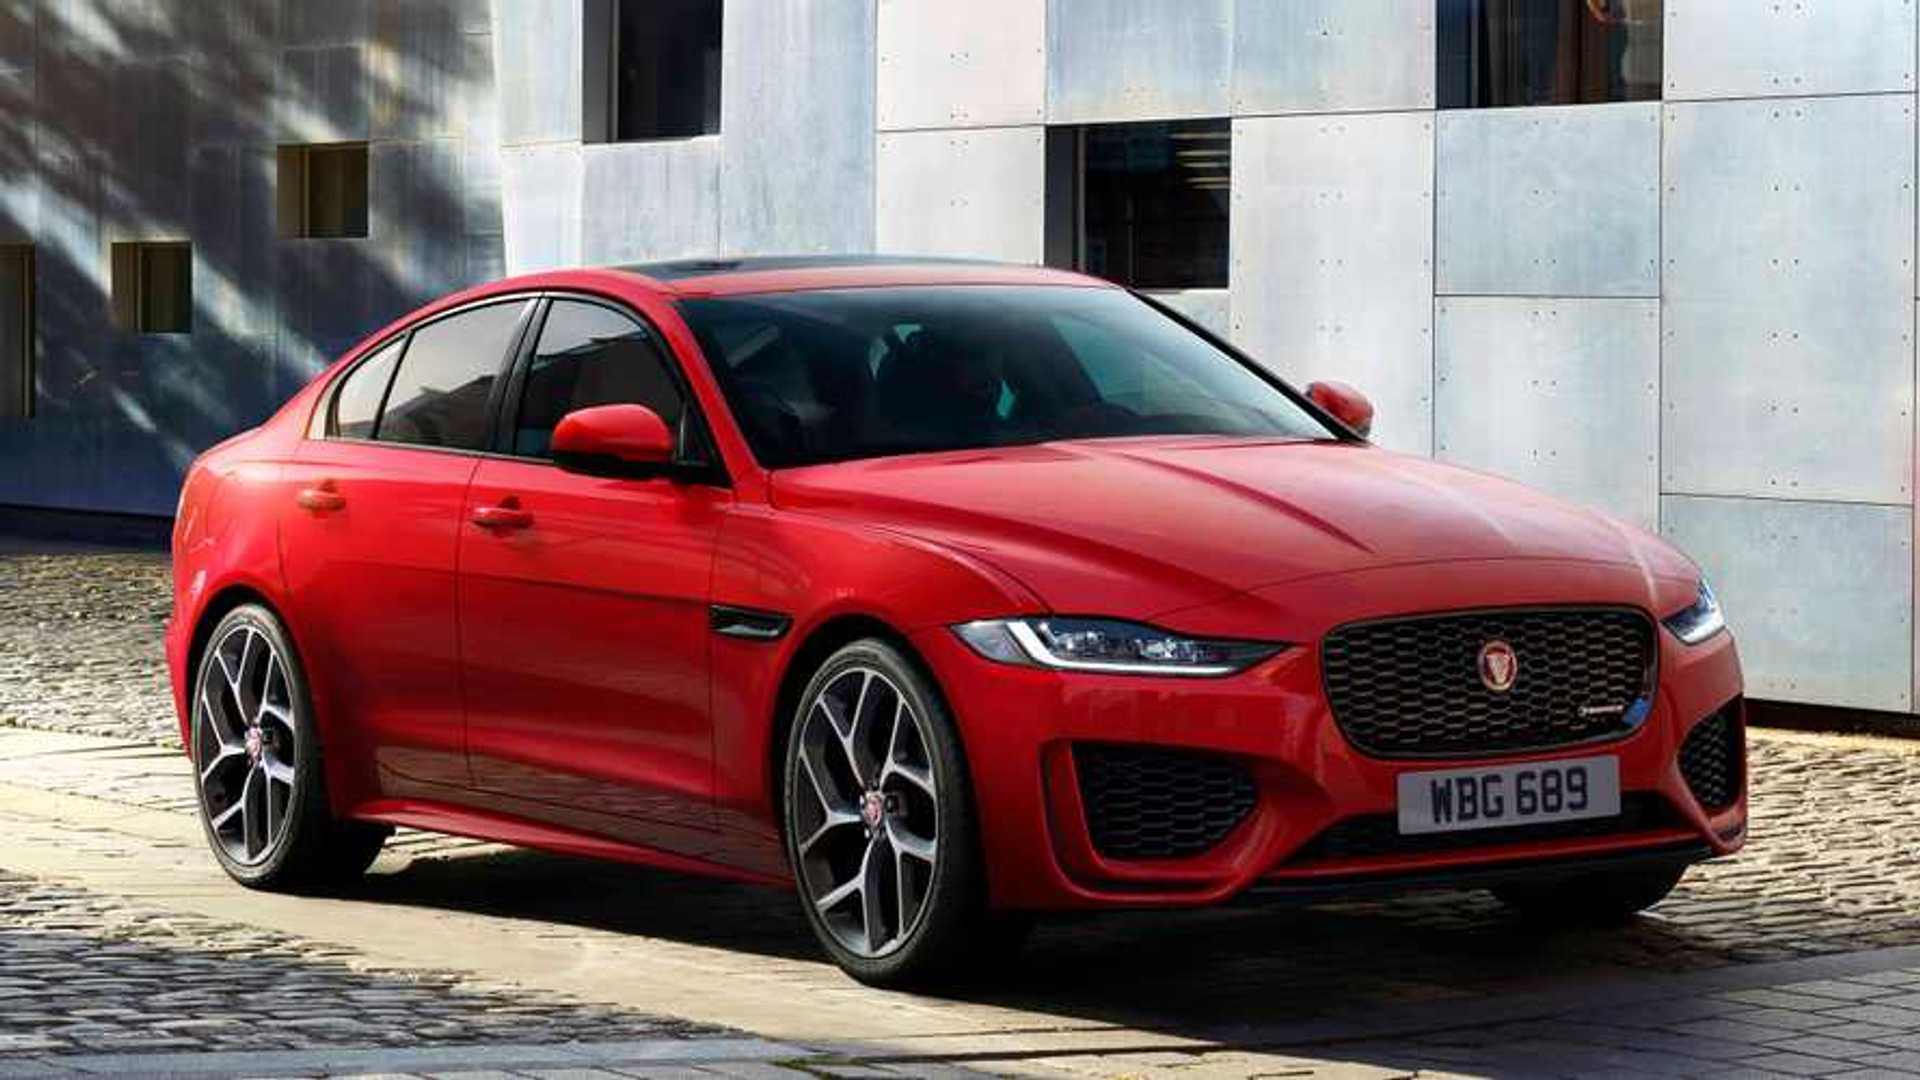 2020 Jaguar XE Revealed With Fresh Face, Improved Interior